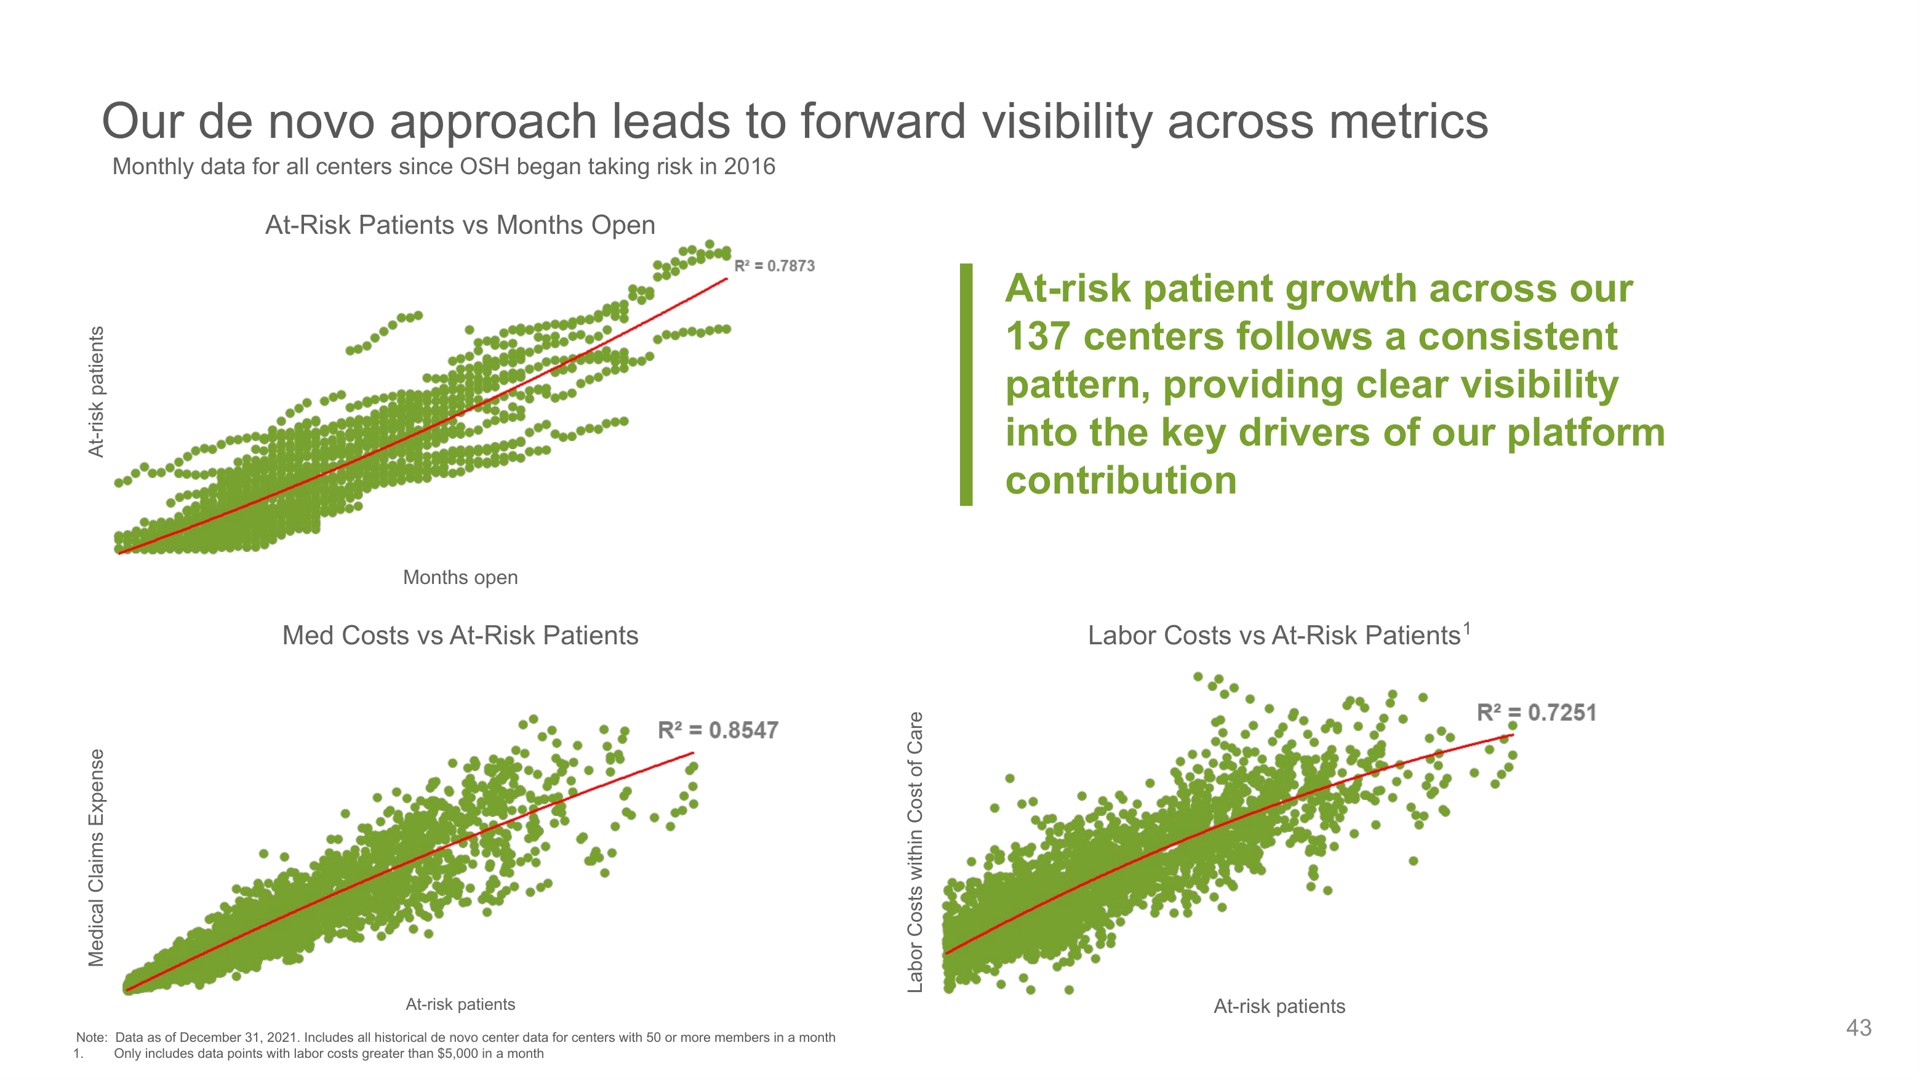 our approach leads to forward visibility across metrics centers follows a consistent into the key drivers of platform | Oak Street Health